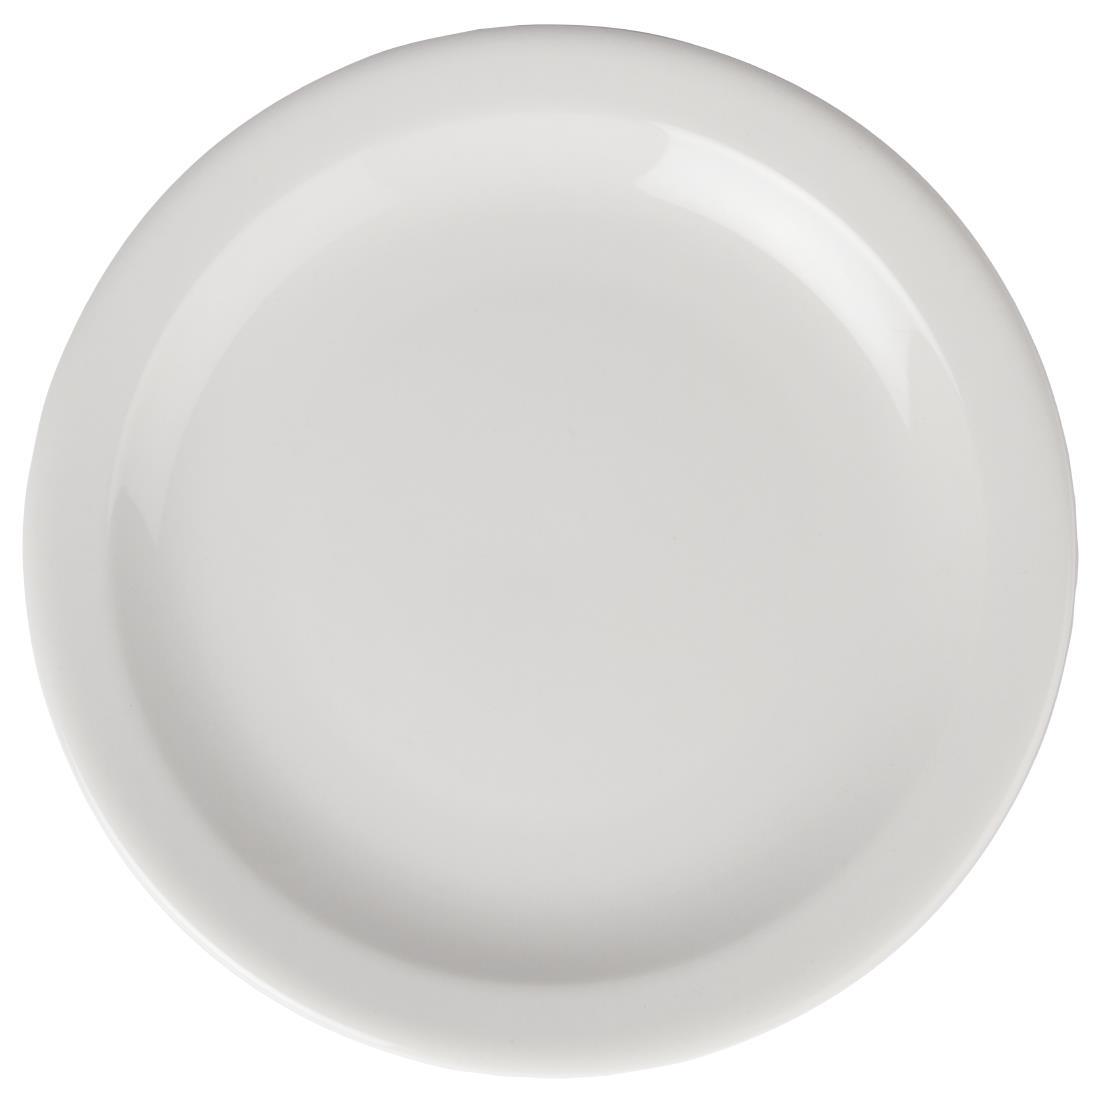 Olympia Athena Narrow Rimmed Plates 205mm (Pack of 12) - CF362  - 3